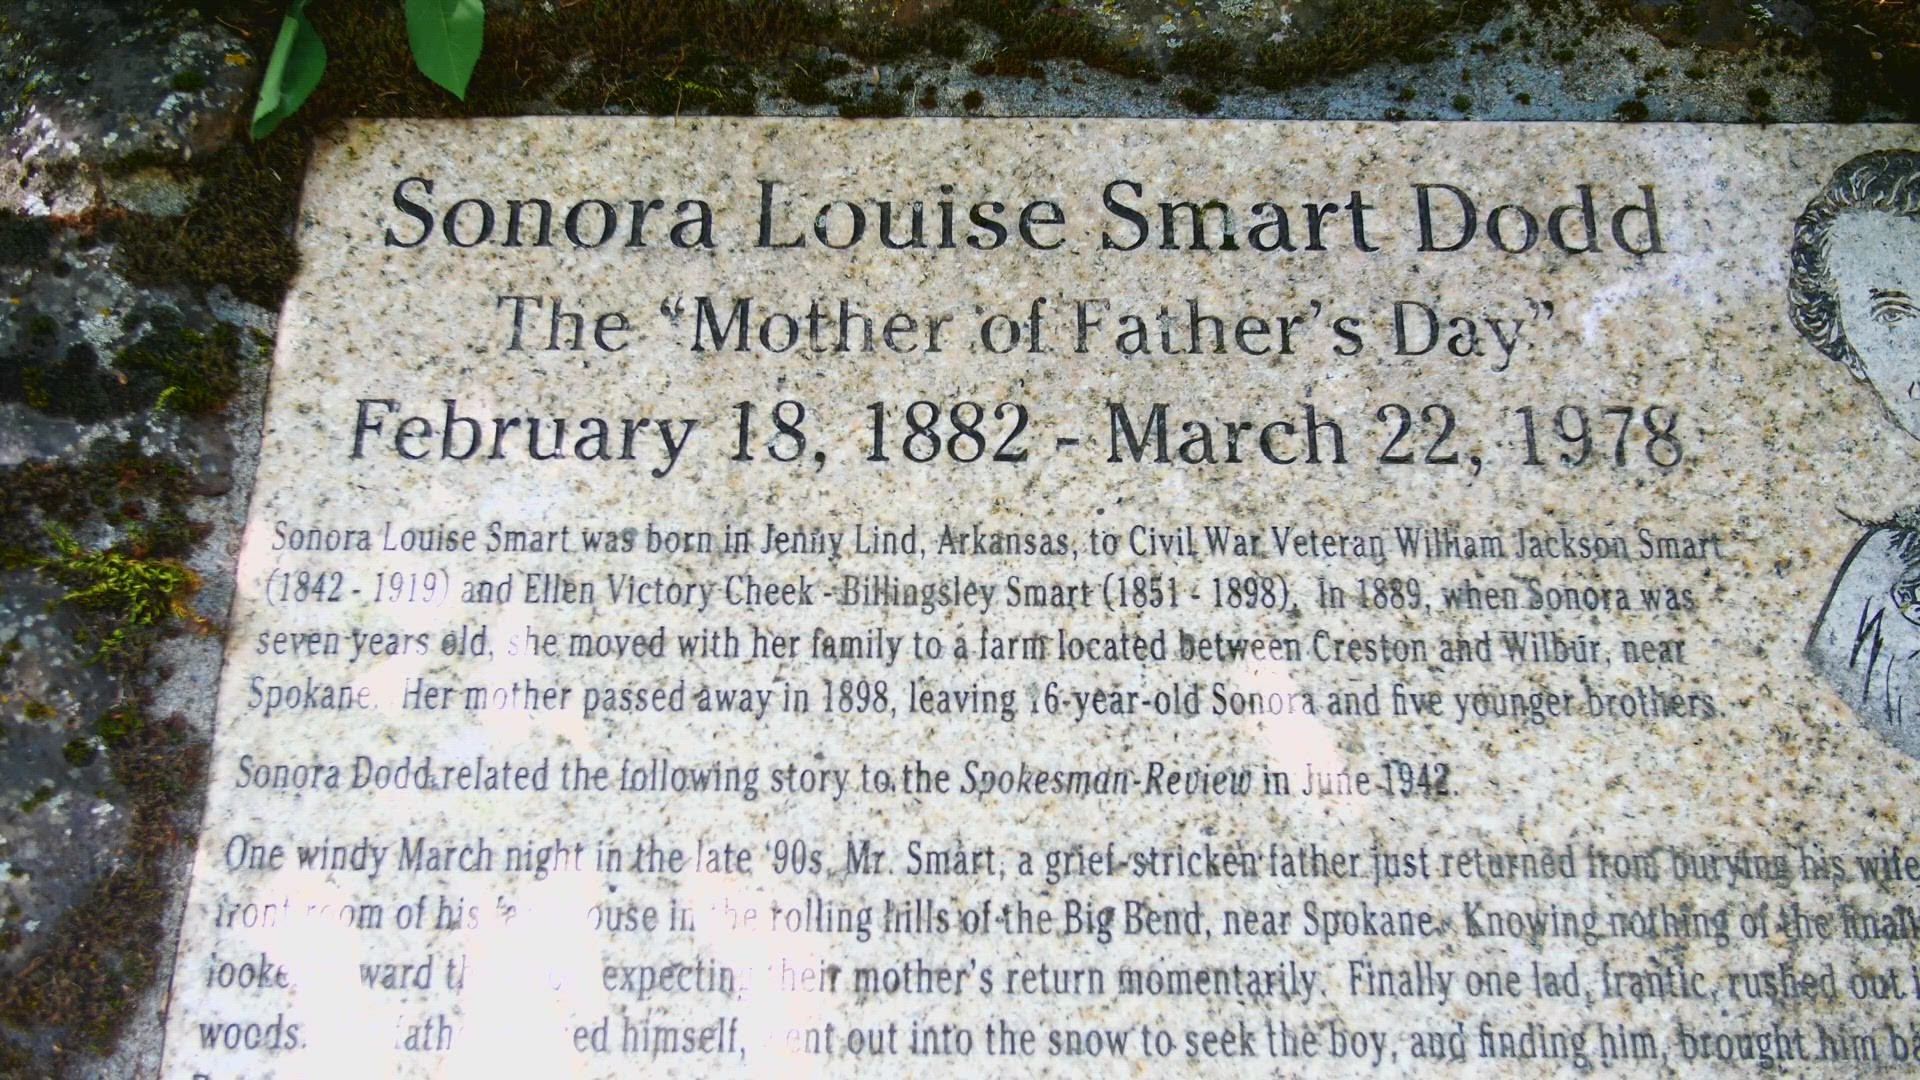 Father's Day originated in Spokane in 1910. Here's more about the woman behind it and how it became a national holiday.